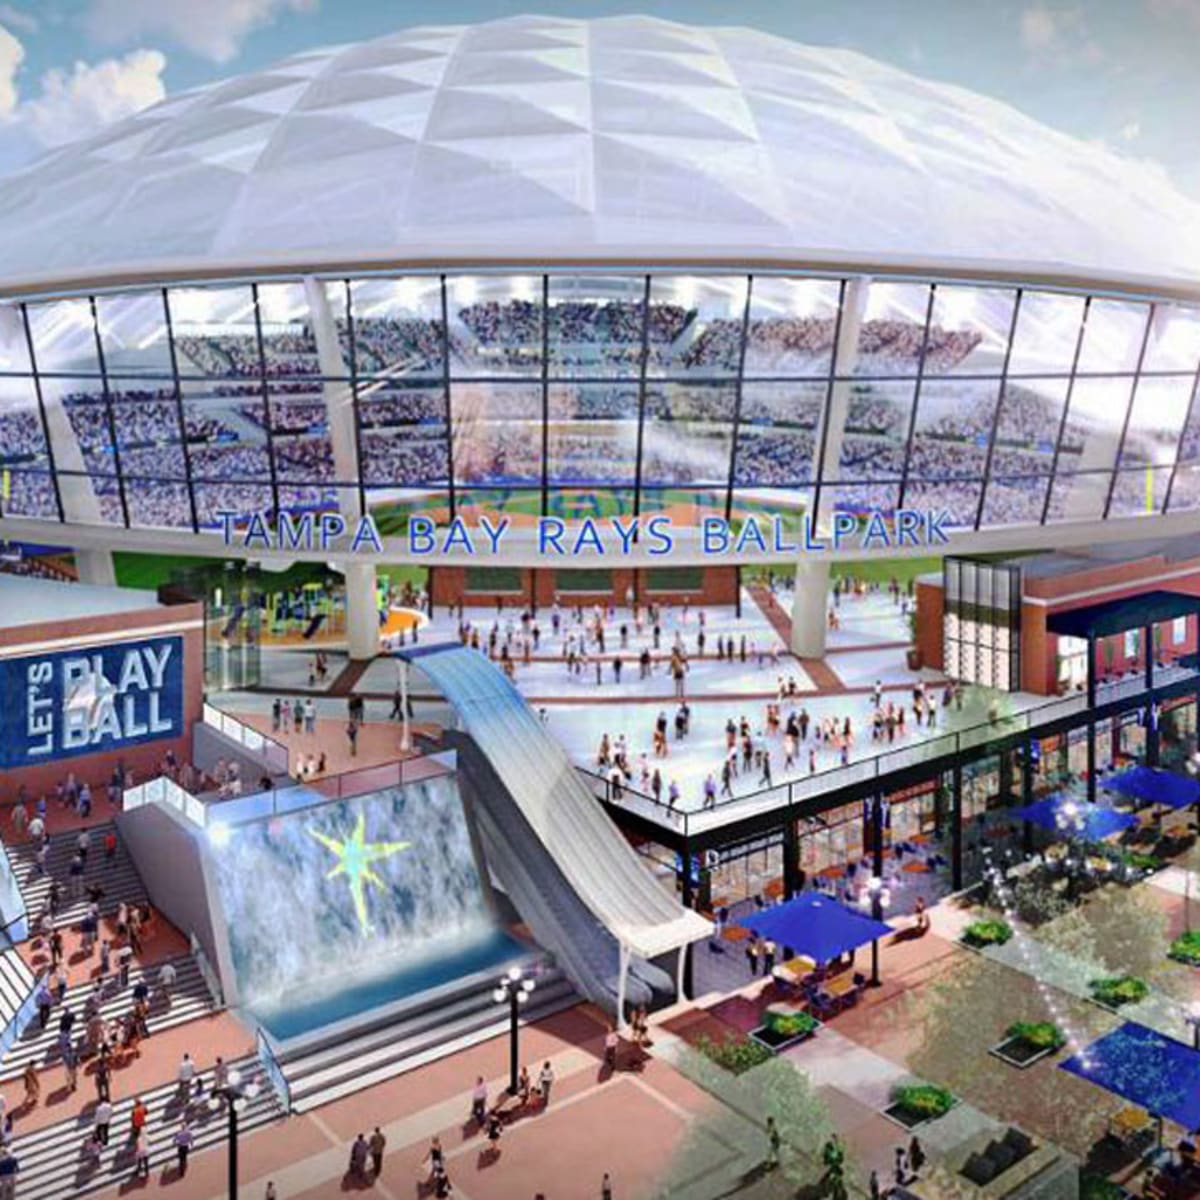 What do you think of these renderings of a new Tampa Bay Rays